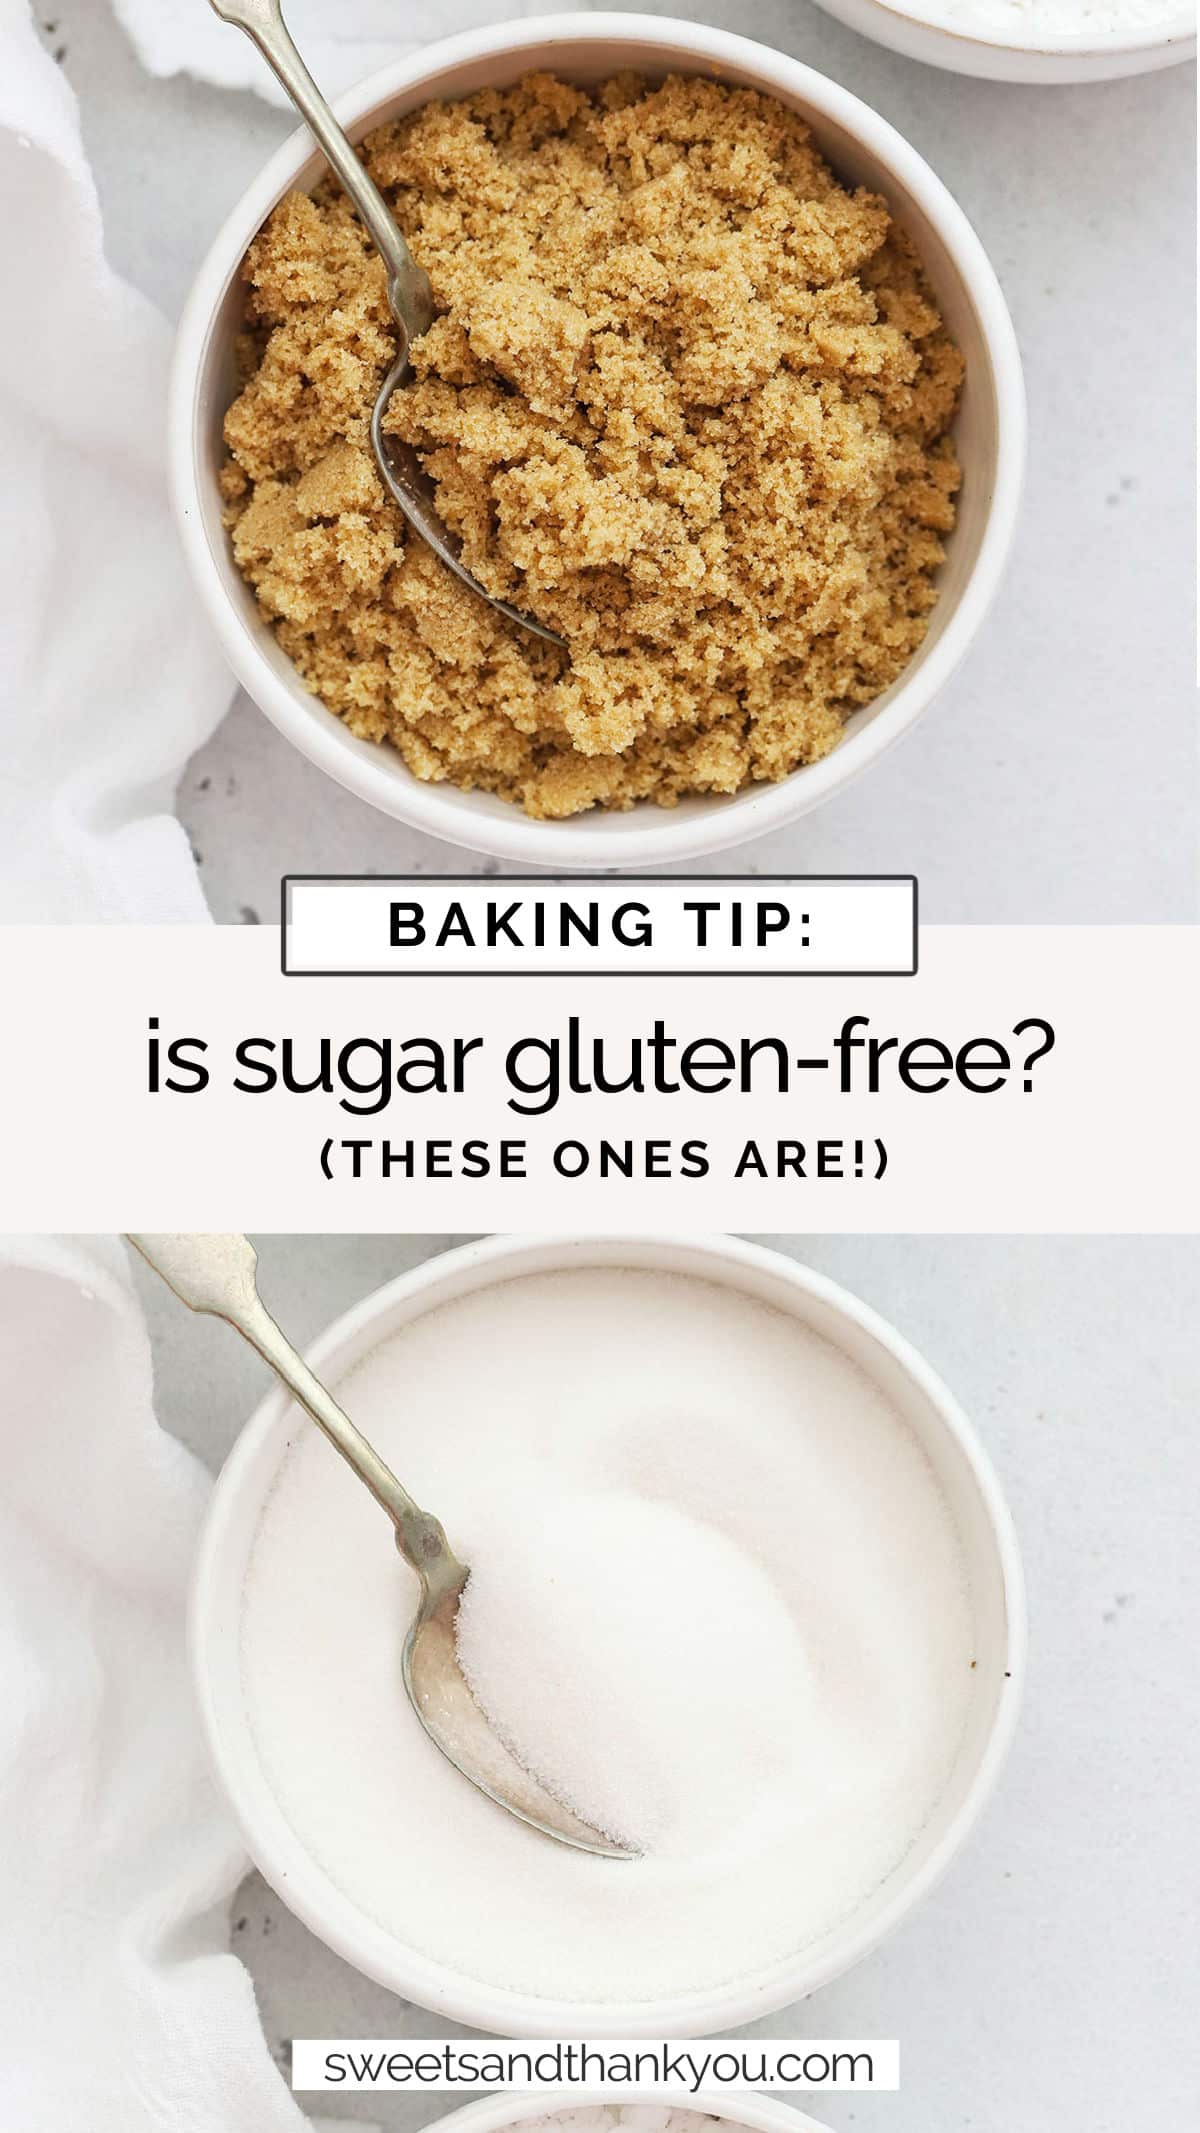 Ever wondered if sugar is gluten-free? We're breaking it all down, from types of sugar, to which brands are gluten-free and more! / brands of gluten free sugar / gluten free brands of sugar / is brown sugar gluten free / is powdered sugar gluten free / are sugar cubes gluten free / what kinds of sugar are gluten free / is all sugar gluten free / where to buy gluten free sugar